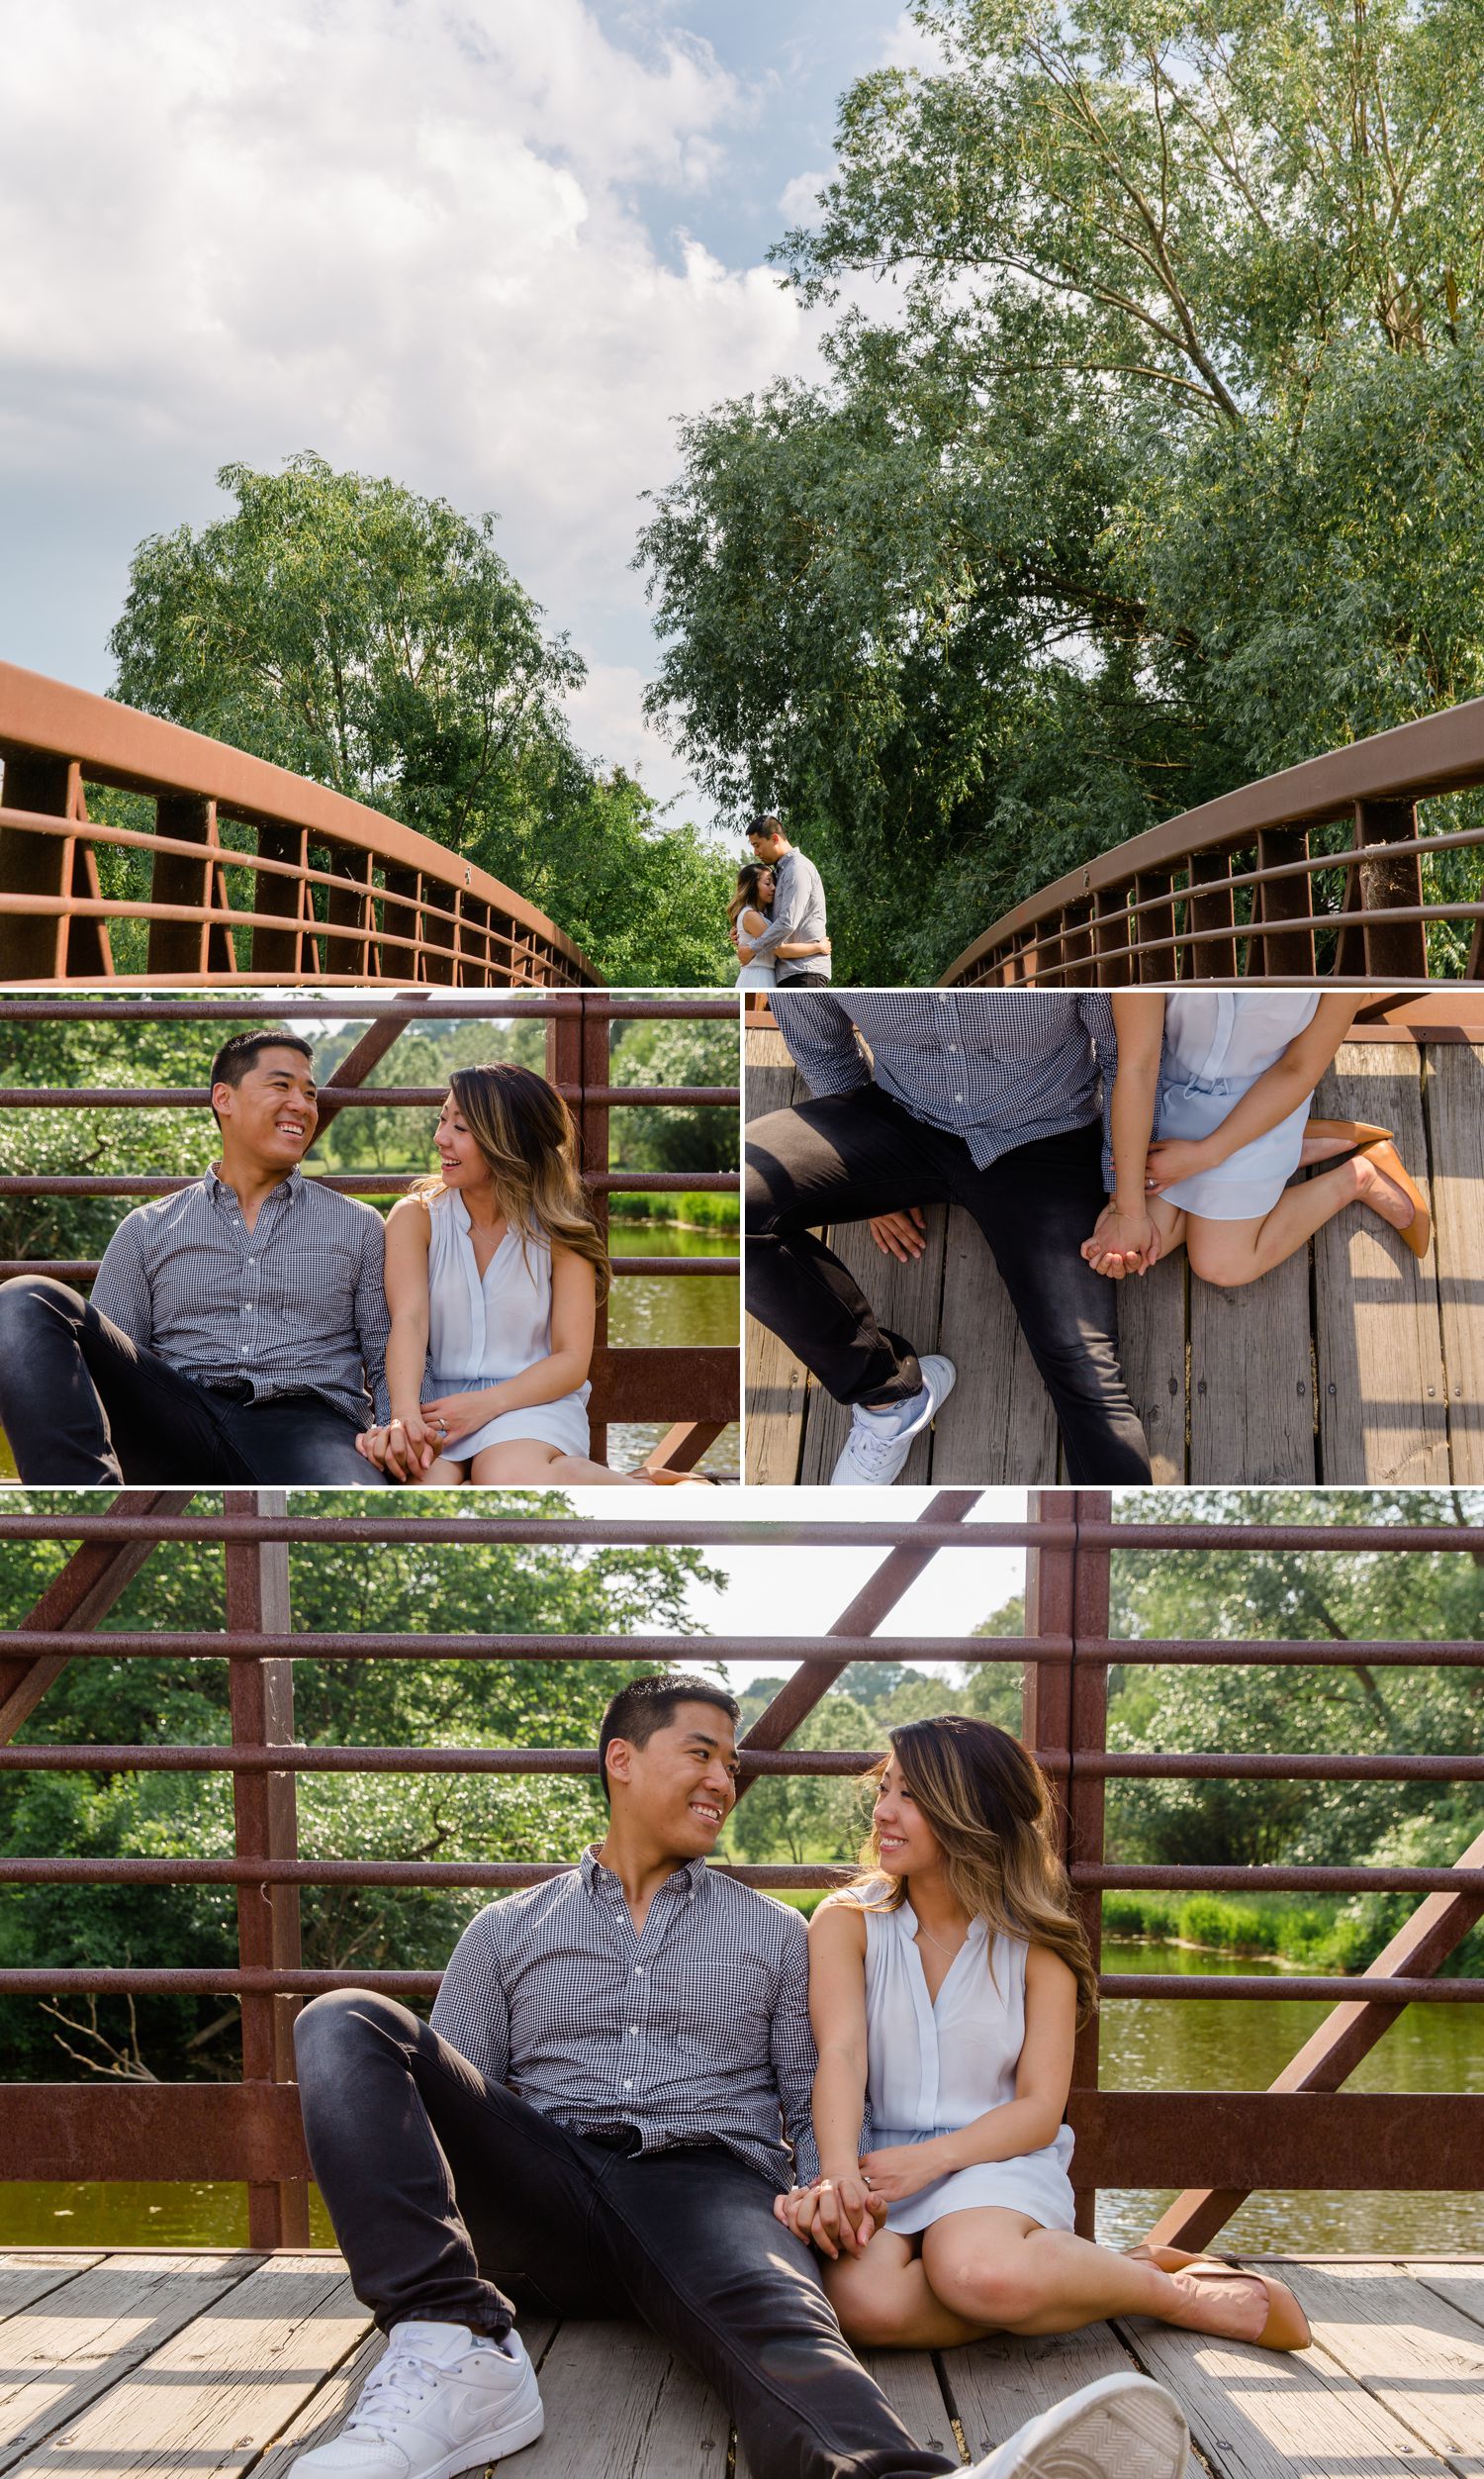 Engagement portraits taken at the Arboretum in Ottawa, ON